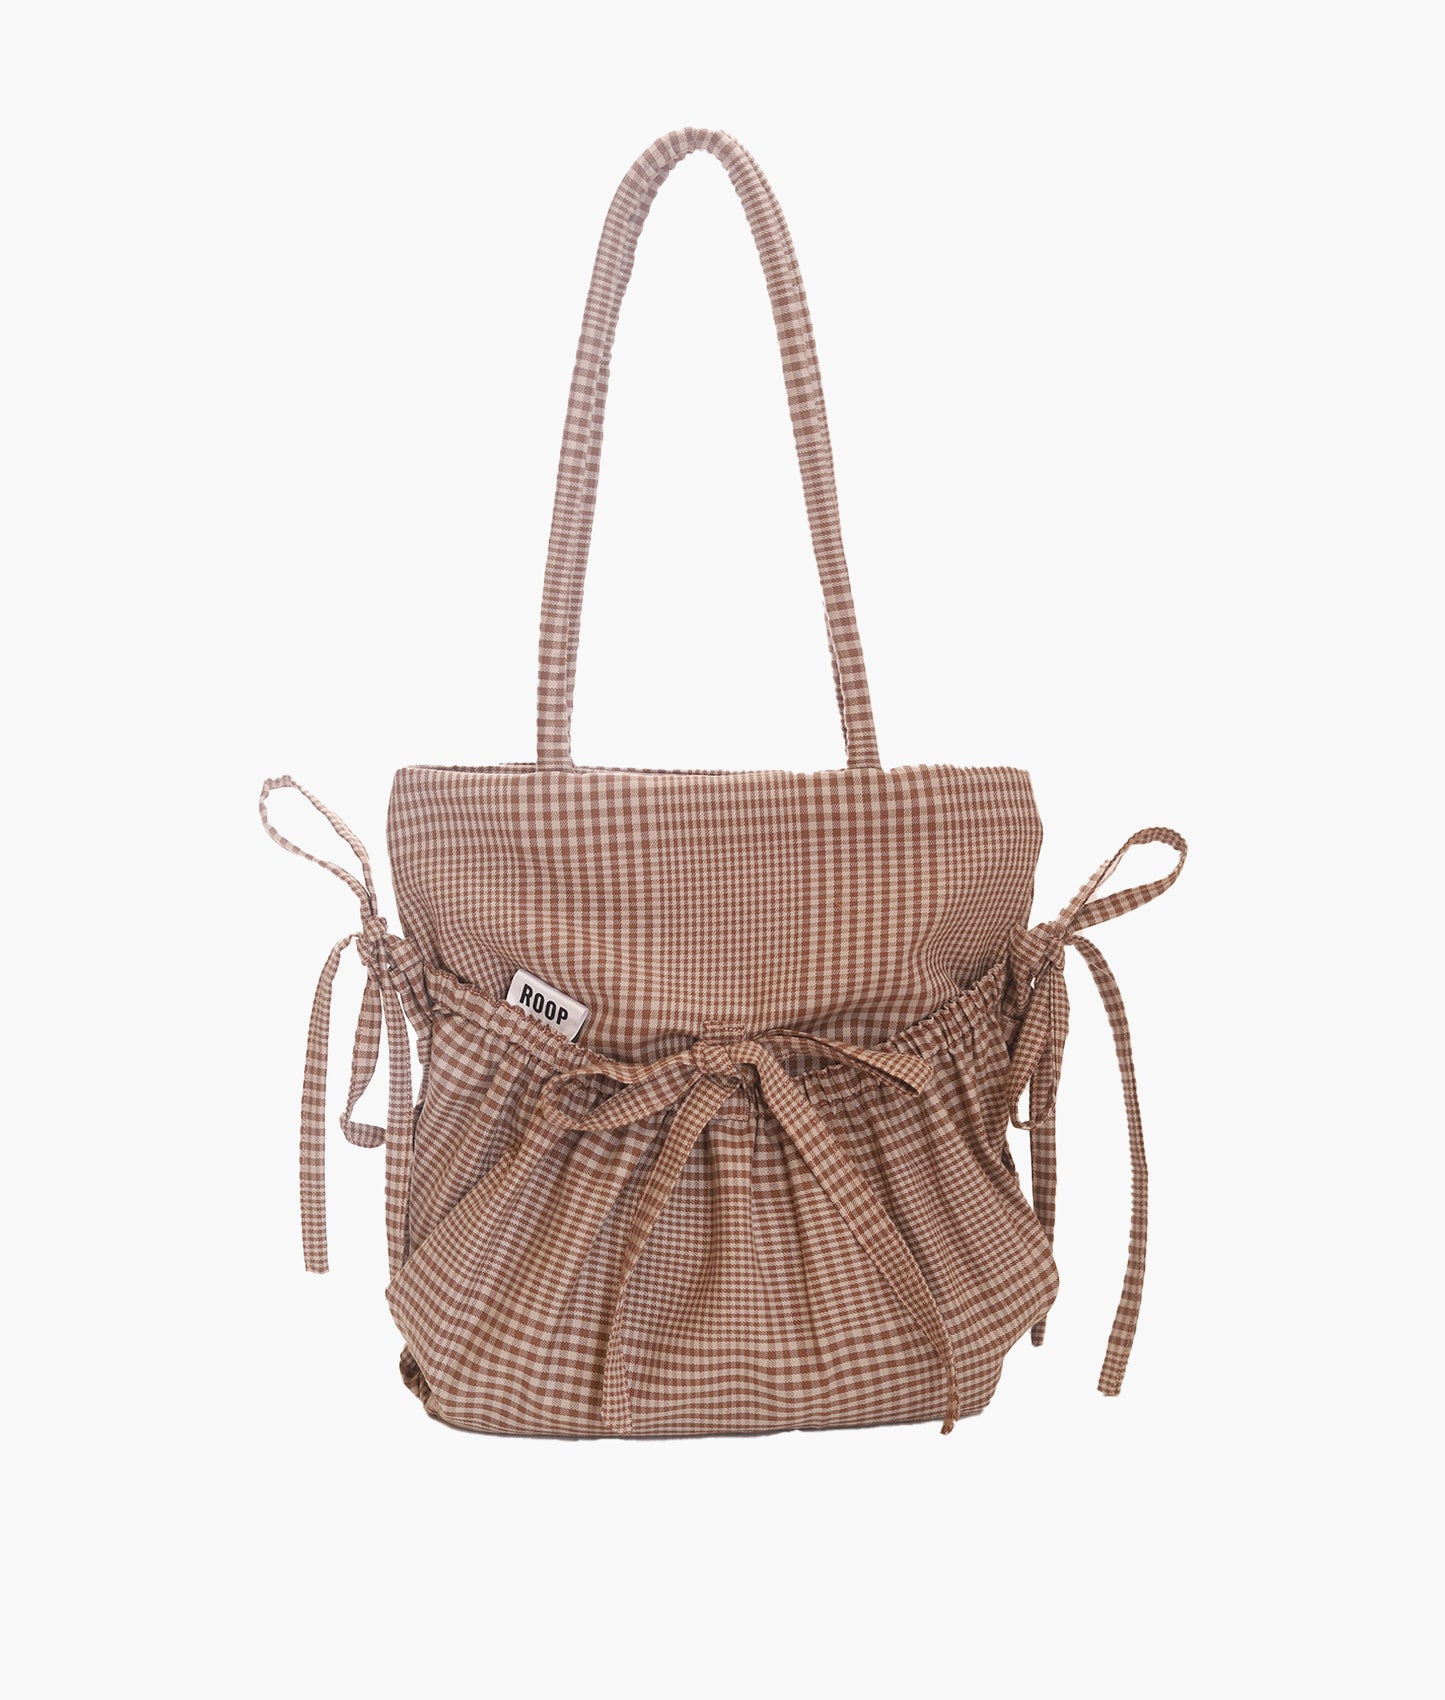 Carrie tote in warm brown check